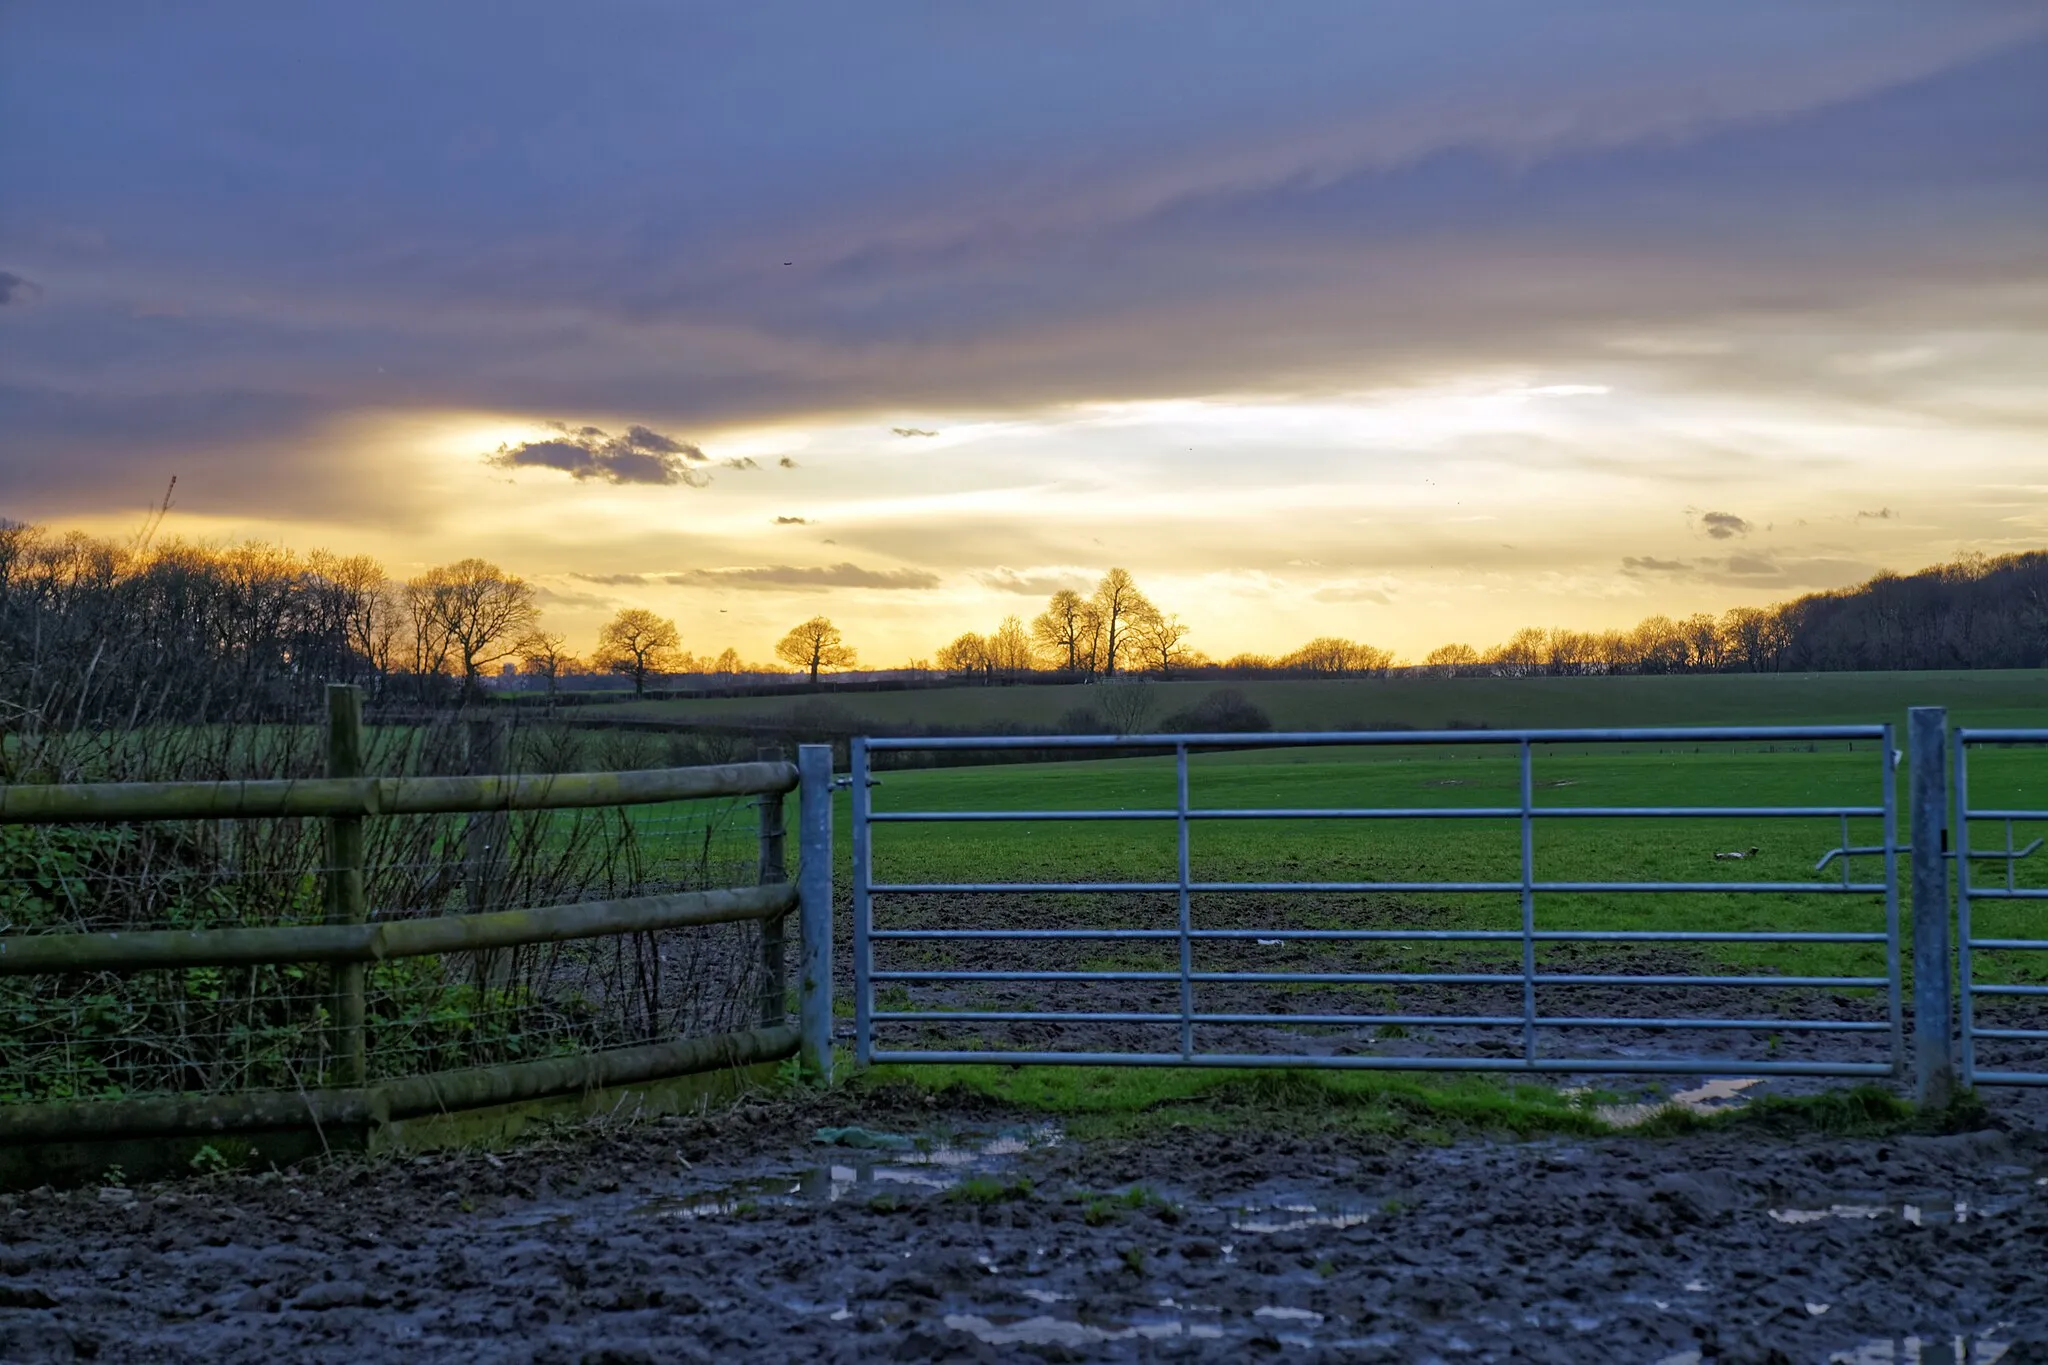 Photo showing: A sunset view west over a field from Tawney Lane at the edge of Northlands Wood in the civil parish of Stapleford Tawney, Essex, England. Camera: Canon EOS 6D with Canon EF 24-105mm F4L IS USM lens Software: file lens-corrected and optimized with DxO OpticsPro 10 Elite and Viewpoint 2, and further optimized with Adobe Photoshop CS2.